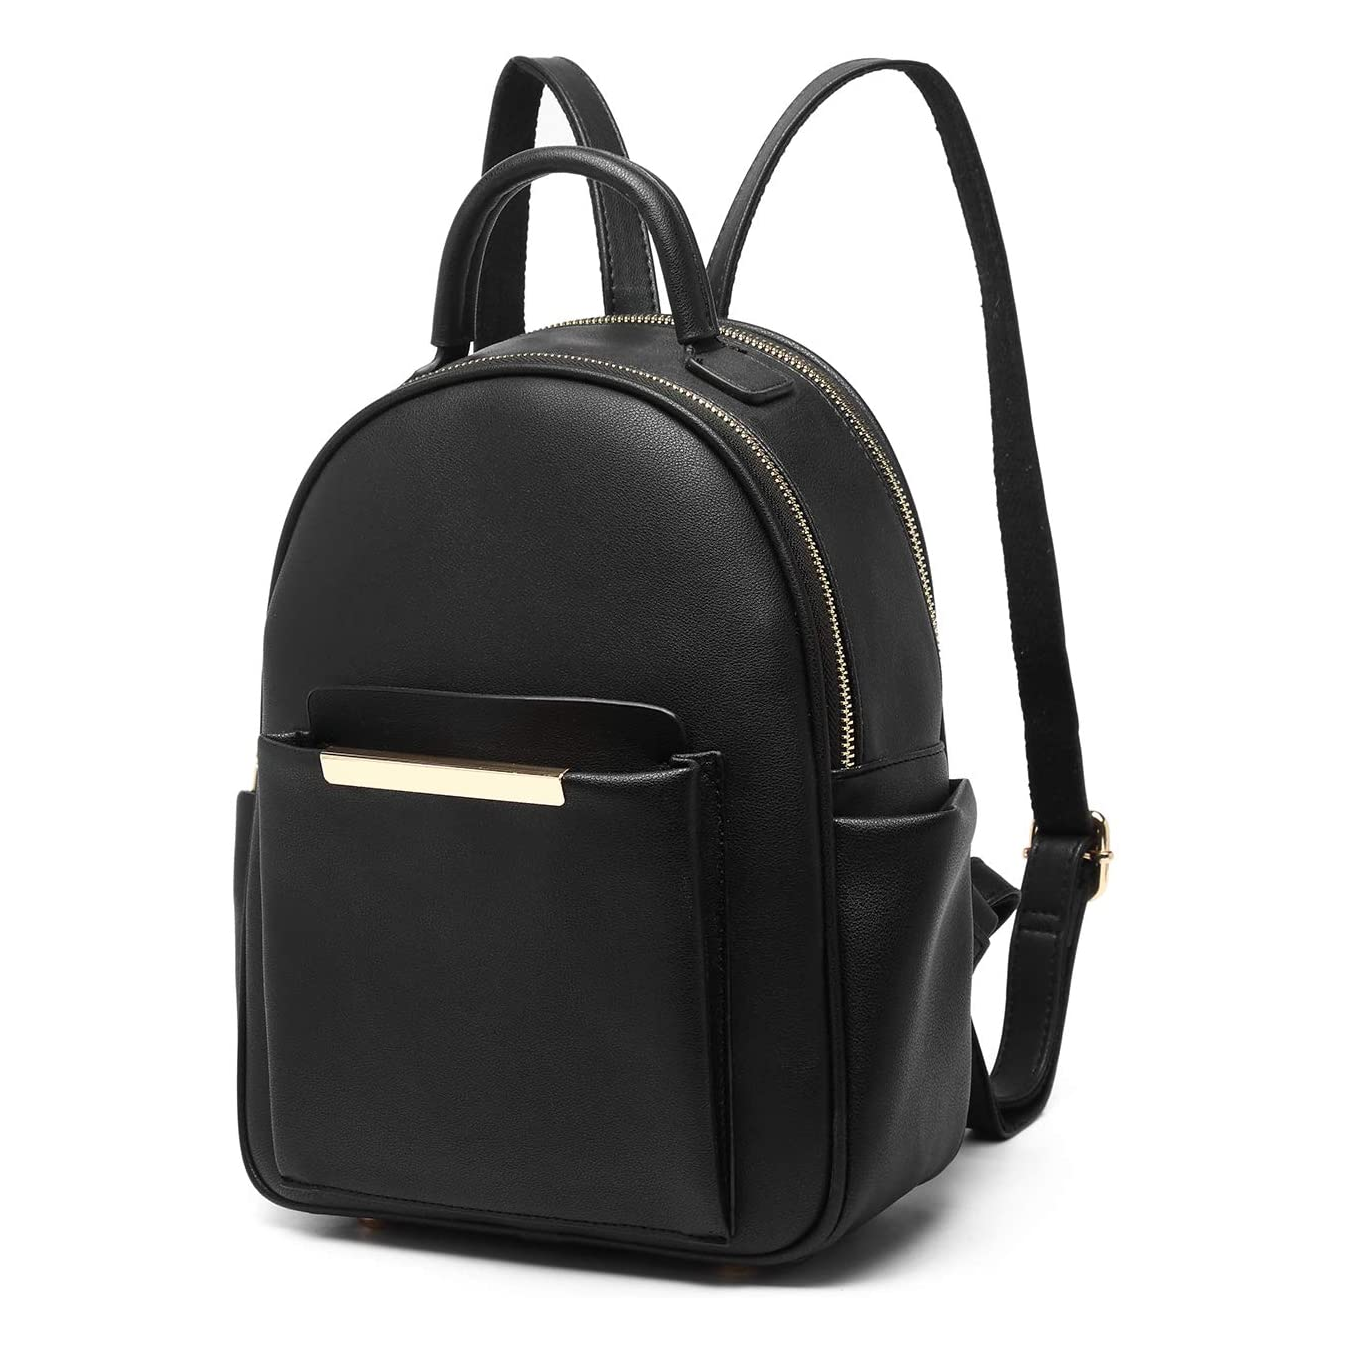 La Terre Vegan Leather Backpack vs Coach Court Backpack In Signature Canvas